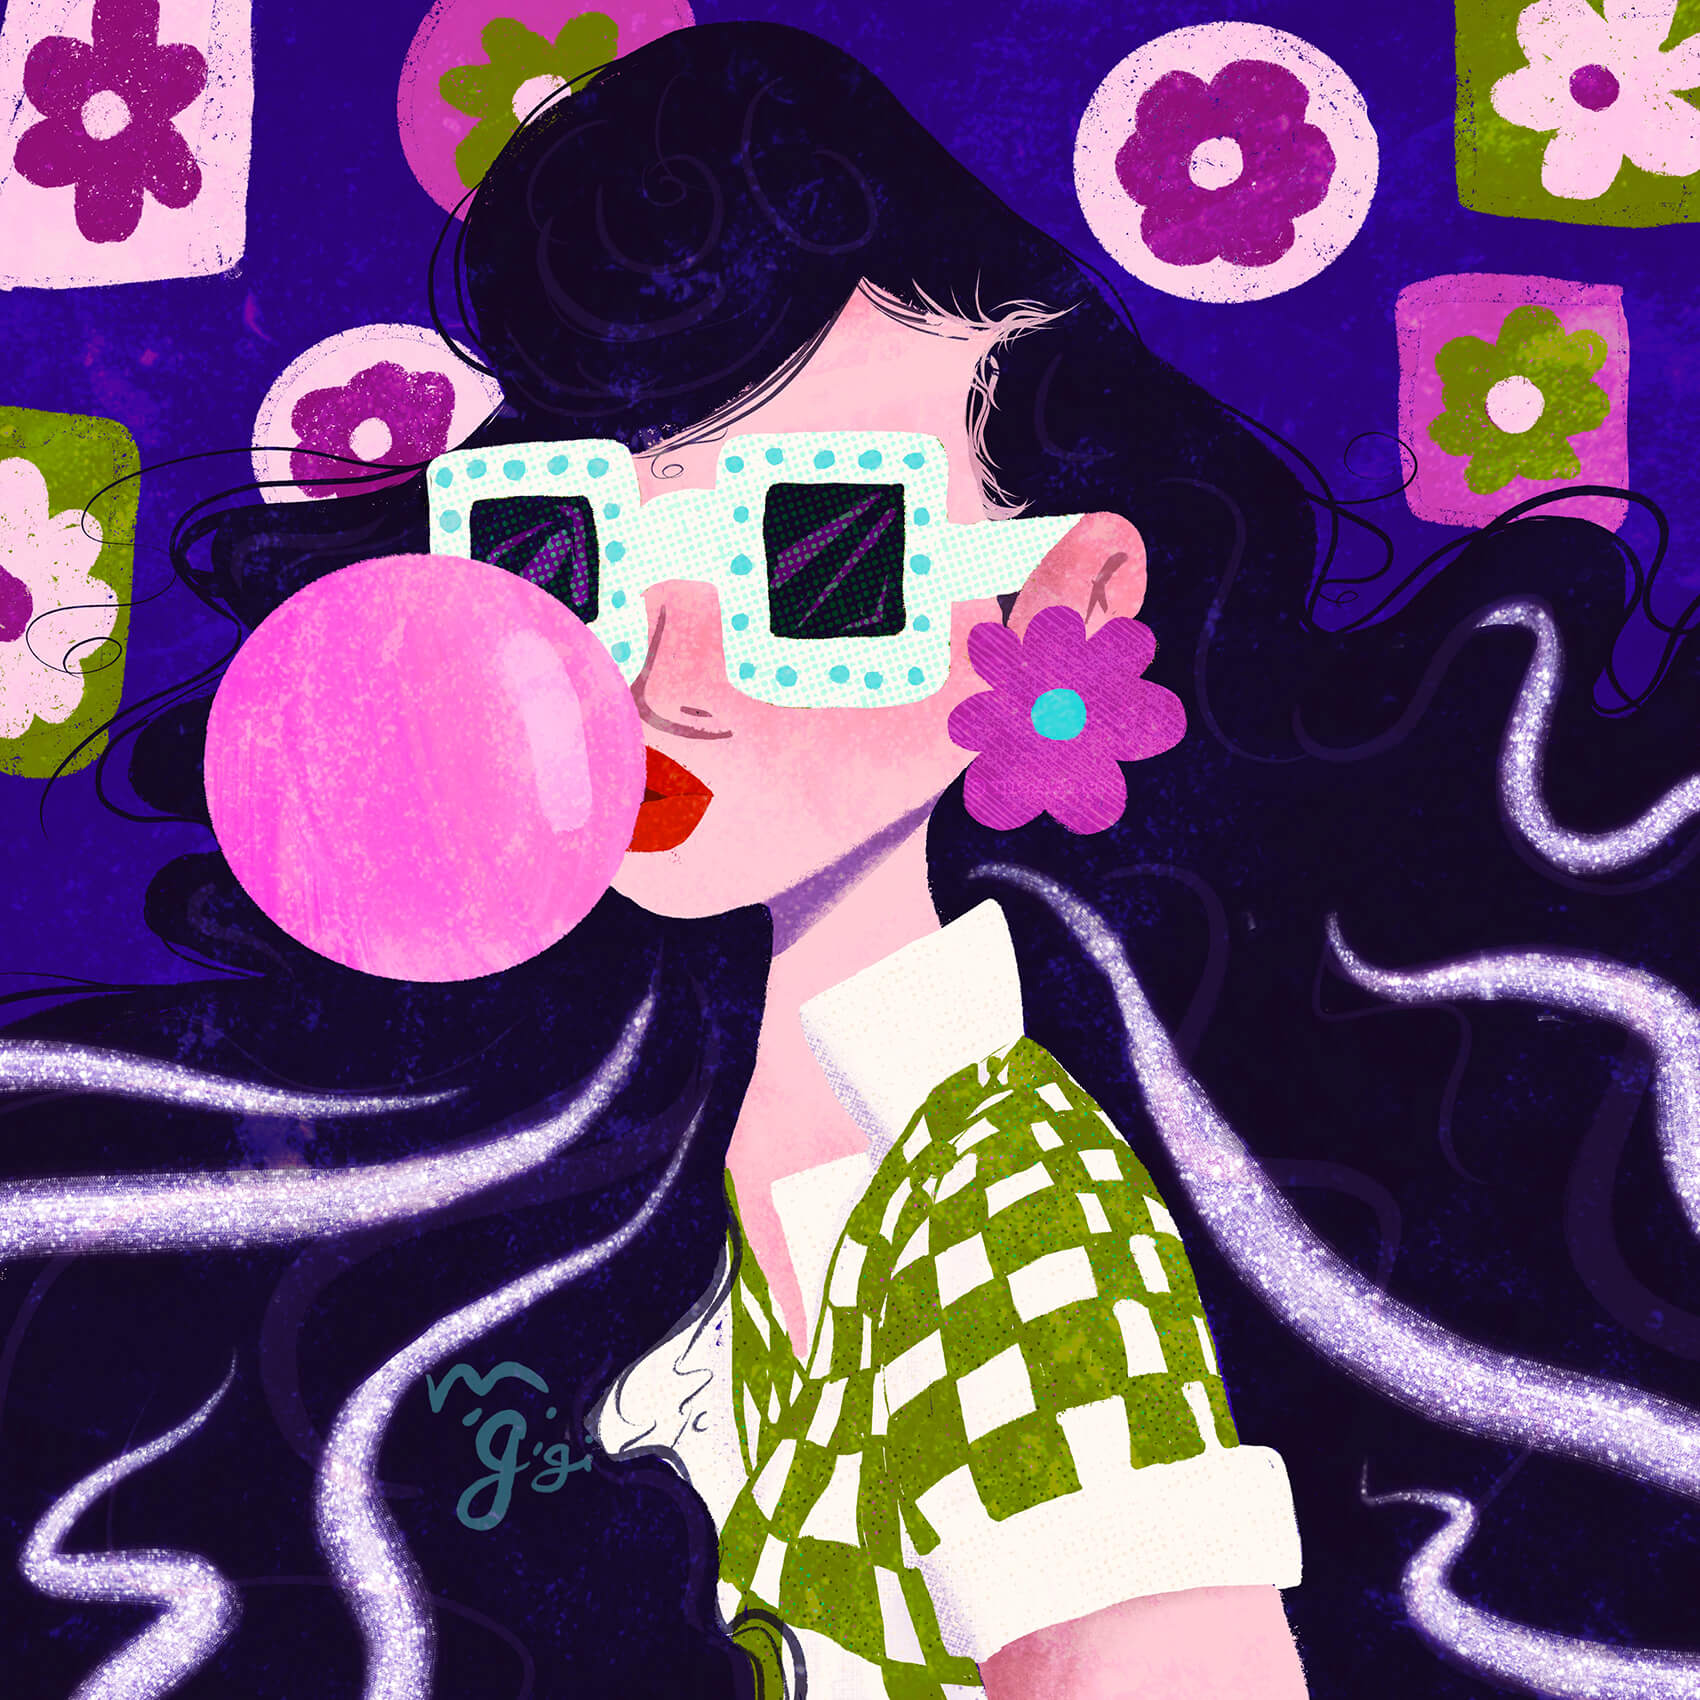 Retro Flora - 2022 neon 70's inspired character illustration, fun with faces, girl with vintage black hairstyle, with square white sunglasses, green and white checkered pattern shirt, blowing hot pink bubble gum with flower squares in the background.